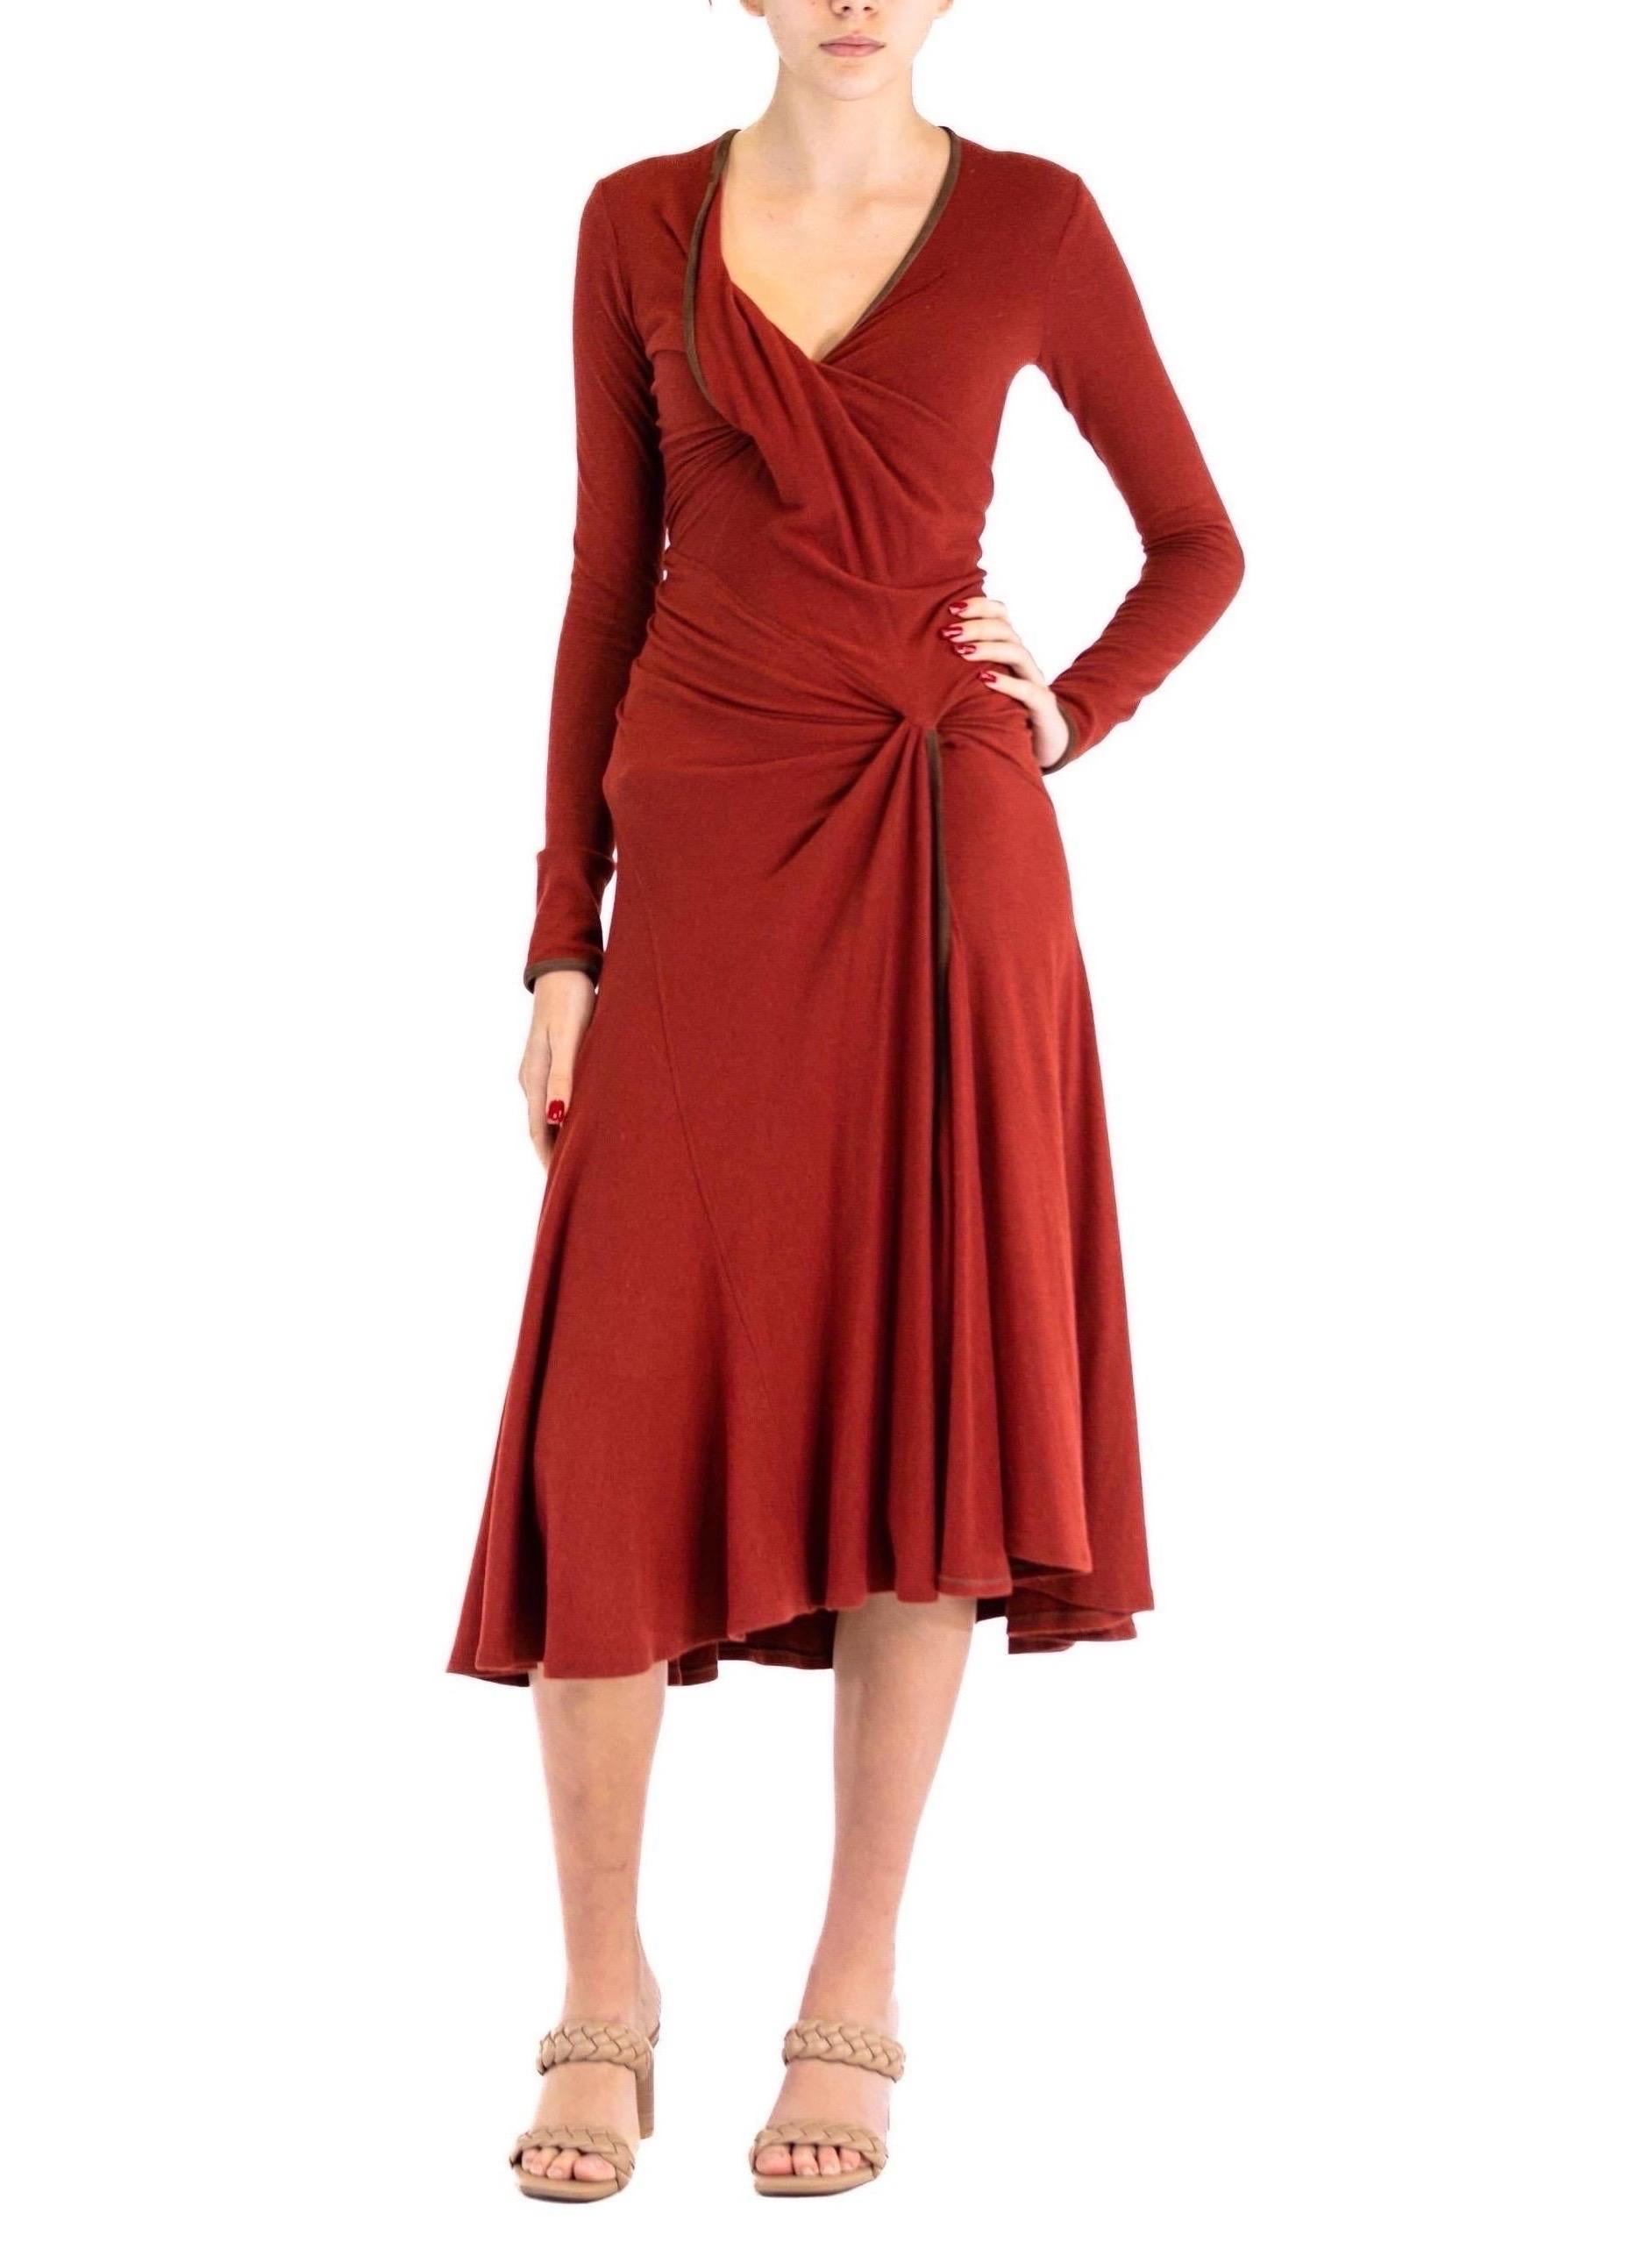 2000S DONNA KARAN Rust Red Wool Blend Jersey Dress With Lambskin Suede Trim For Sale 4